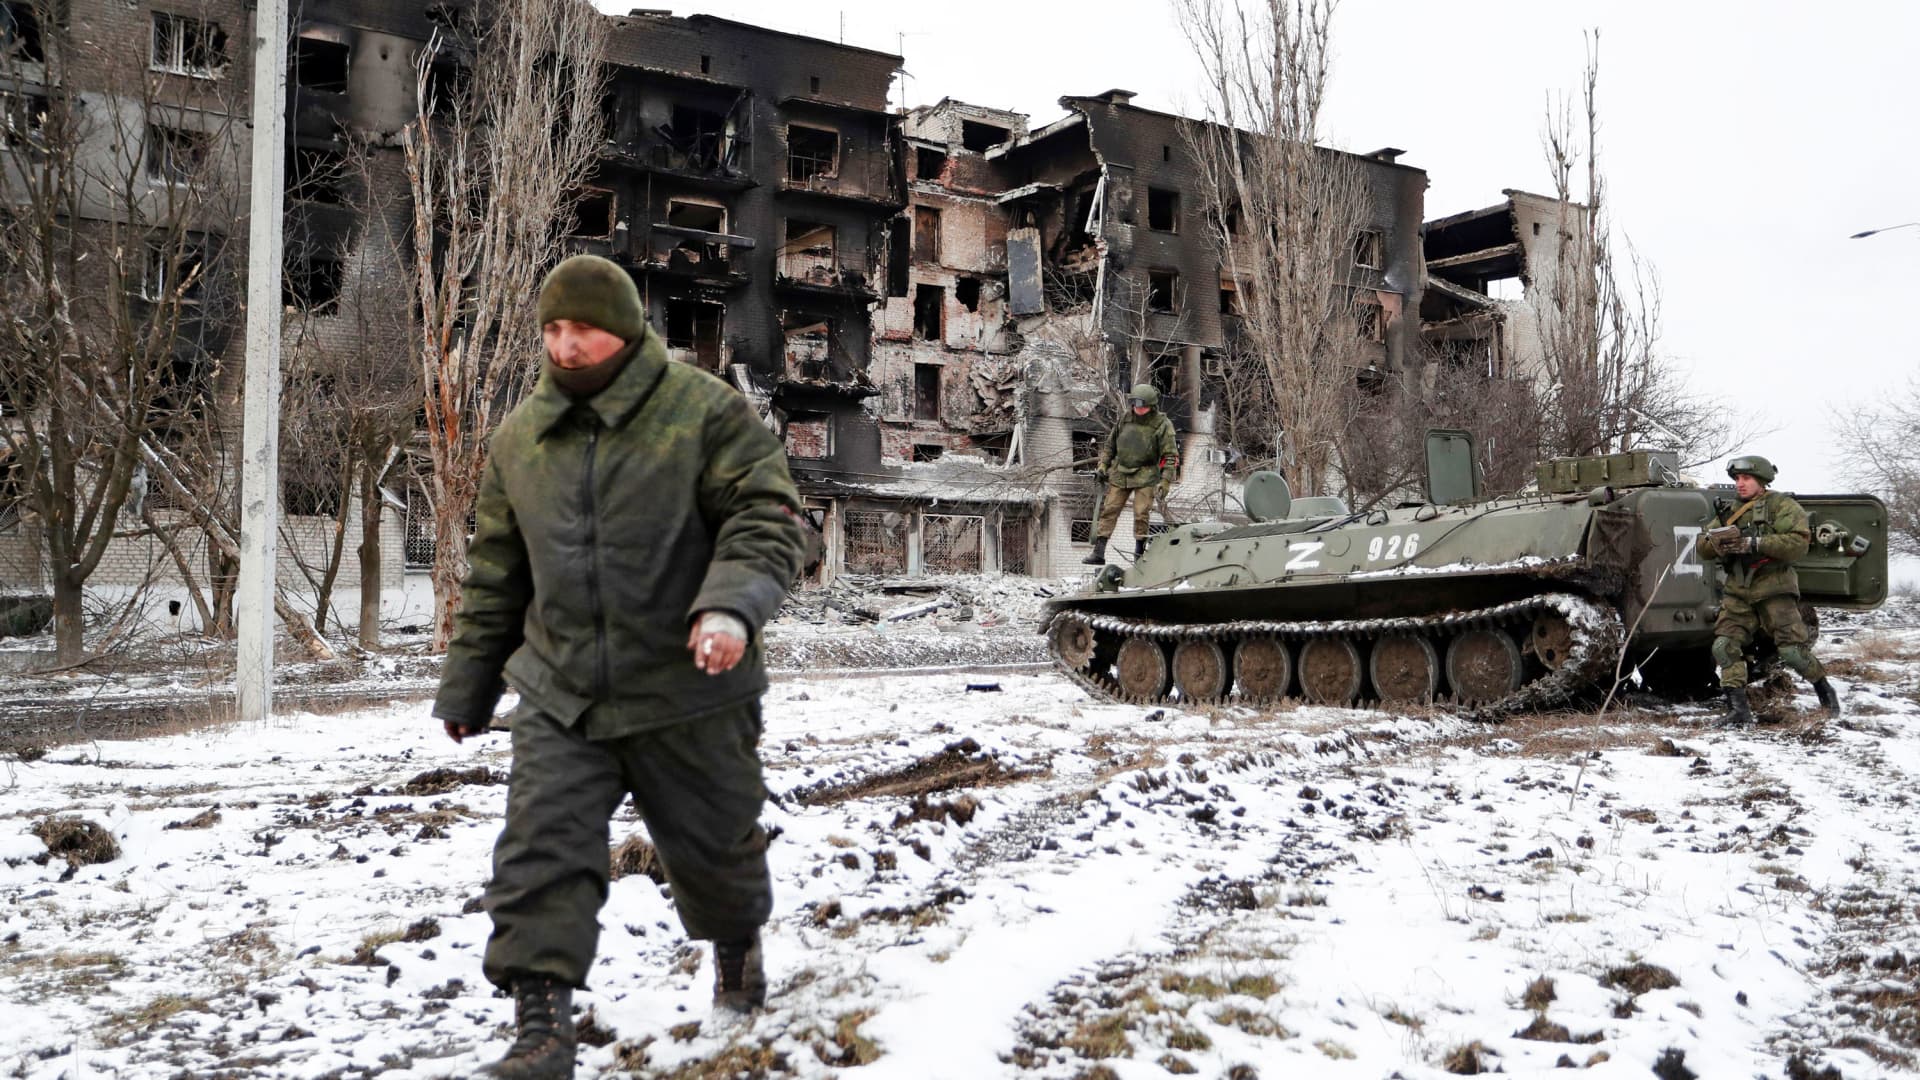 Service members of pro-Russian troops in uniforms without insignia are seen near a residential building which was heavily damaged during Ukraine-Russia conflict in the separatist-controlled town of Volnovakha in the Donetsk region, Ukraine March 11, 2022.